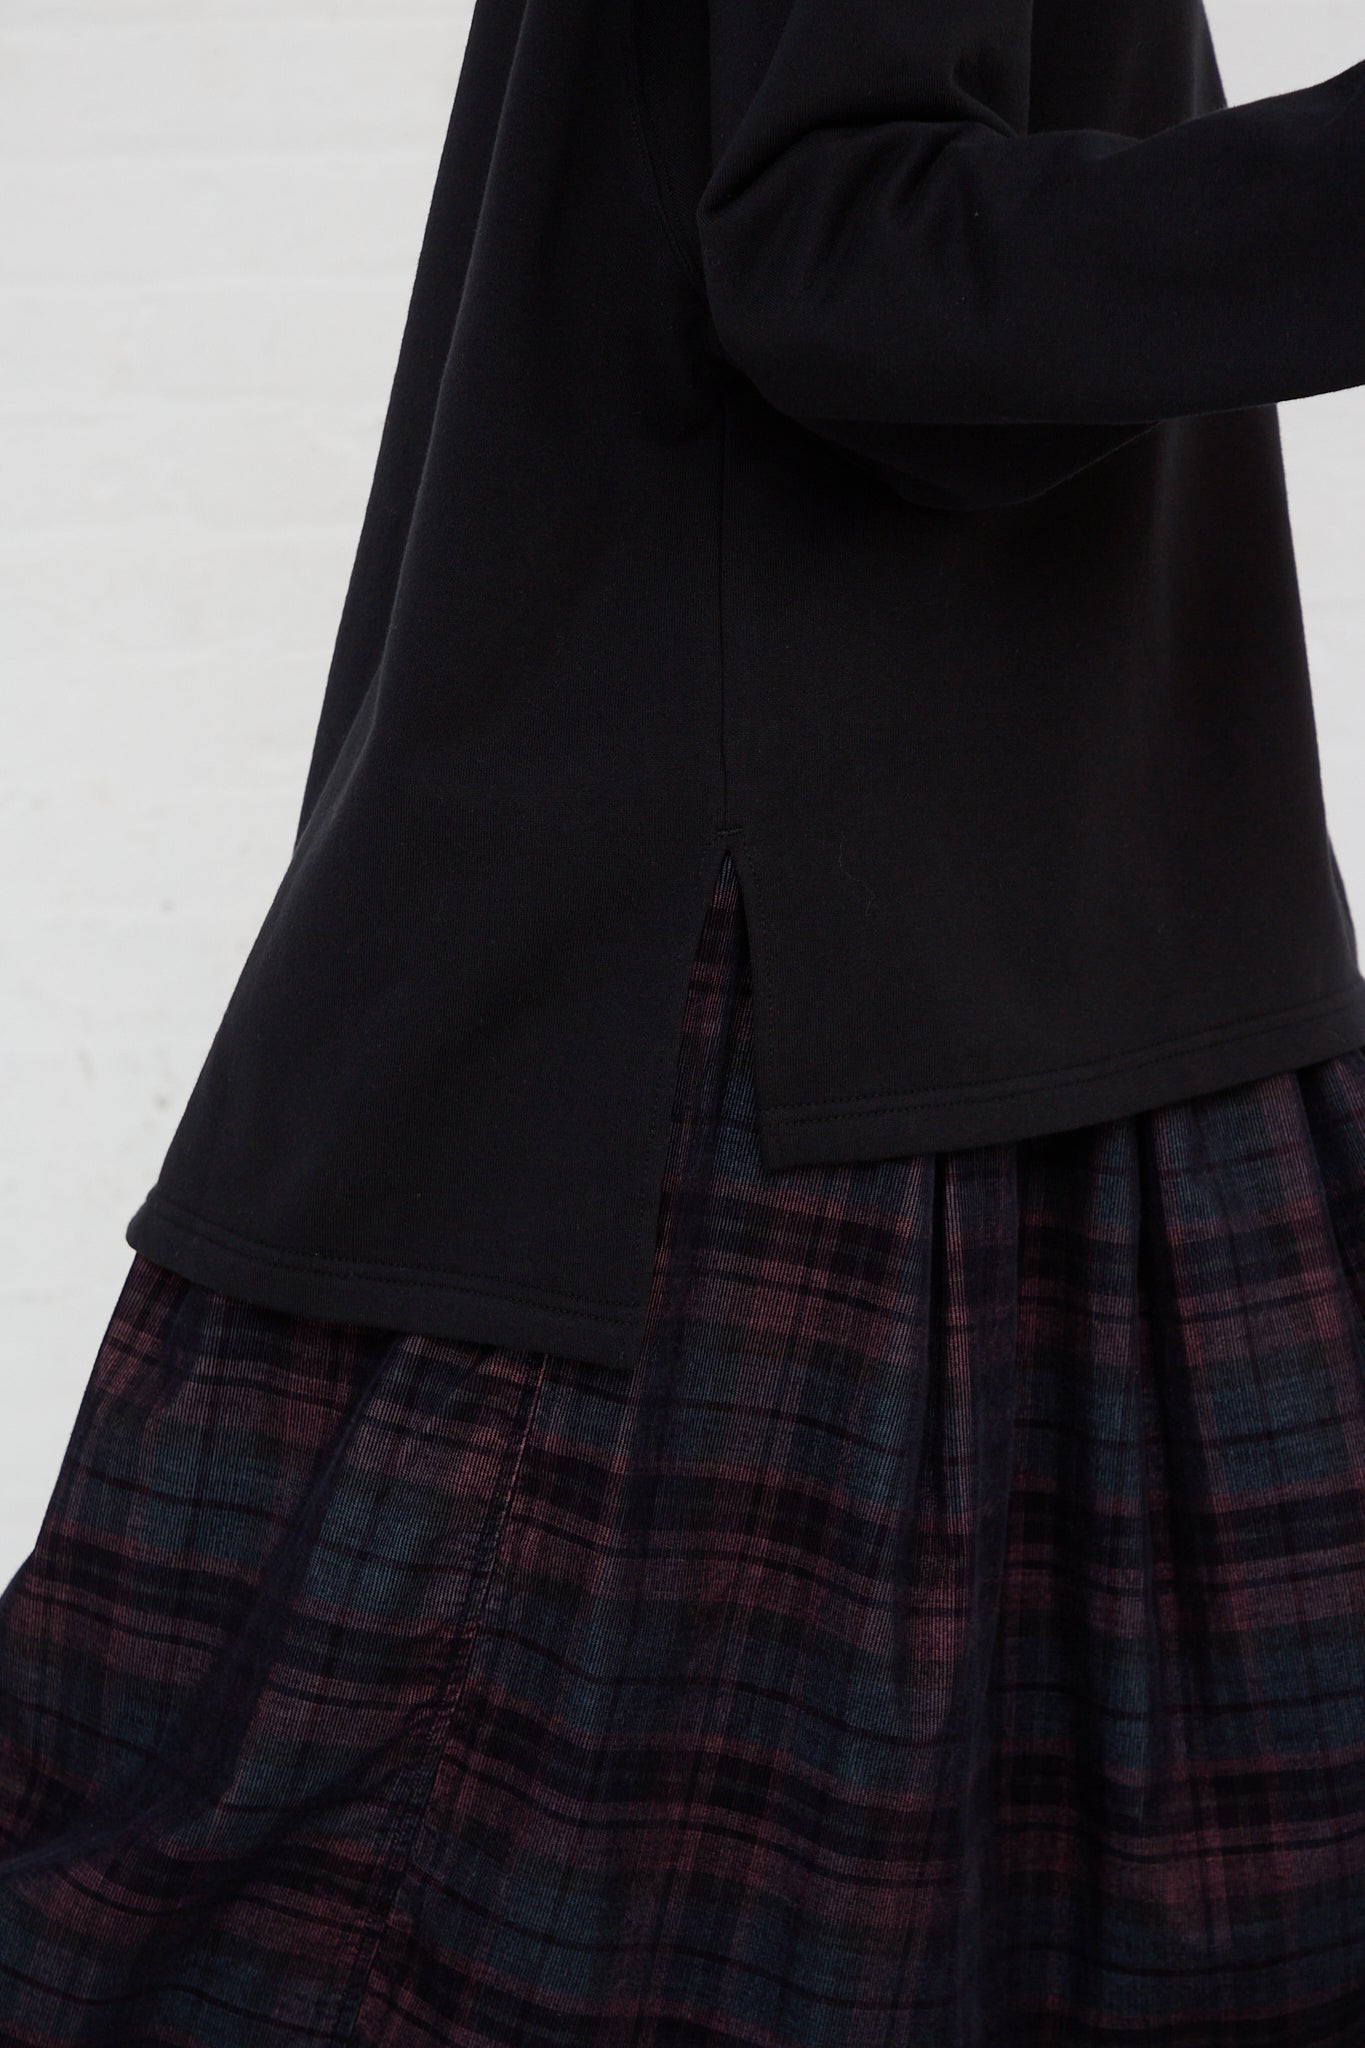 The side view of a woman wearing an Ichi Cotton Knit Pullover in Black and plaid skirt.